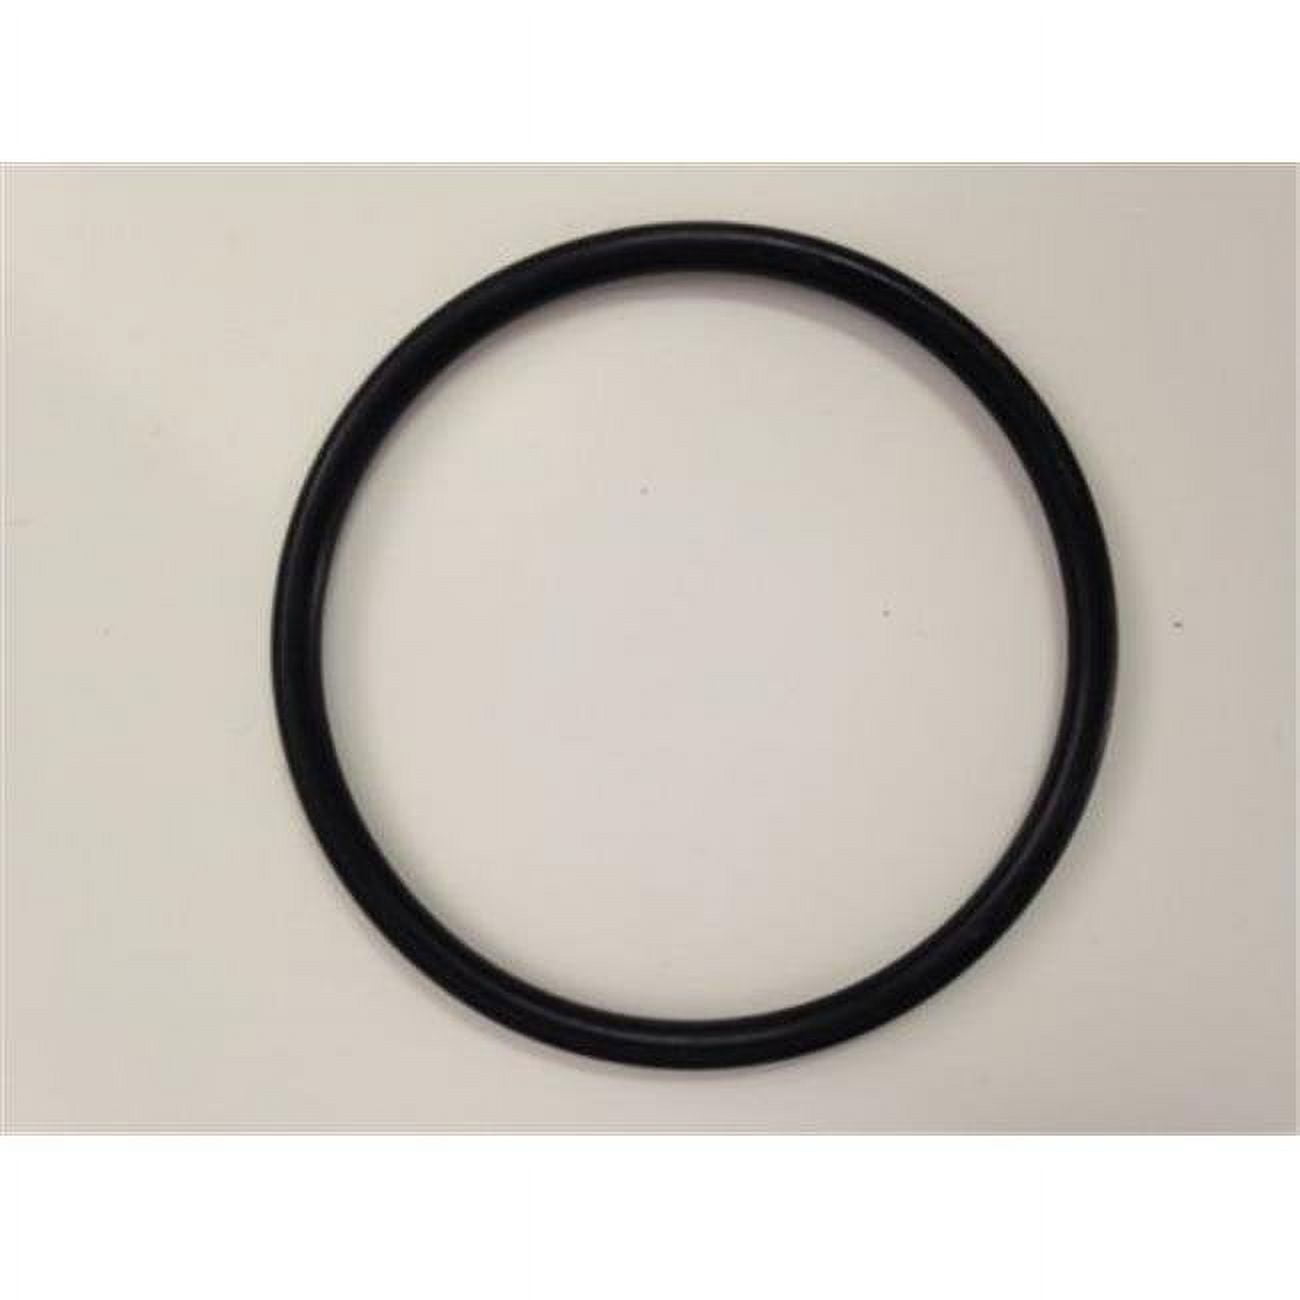 Picture of Aquascape 29486 Replacement O-Ring for the 3 in. Check Valve